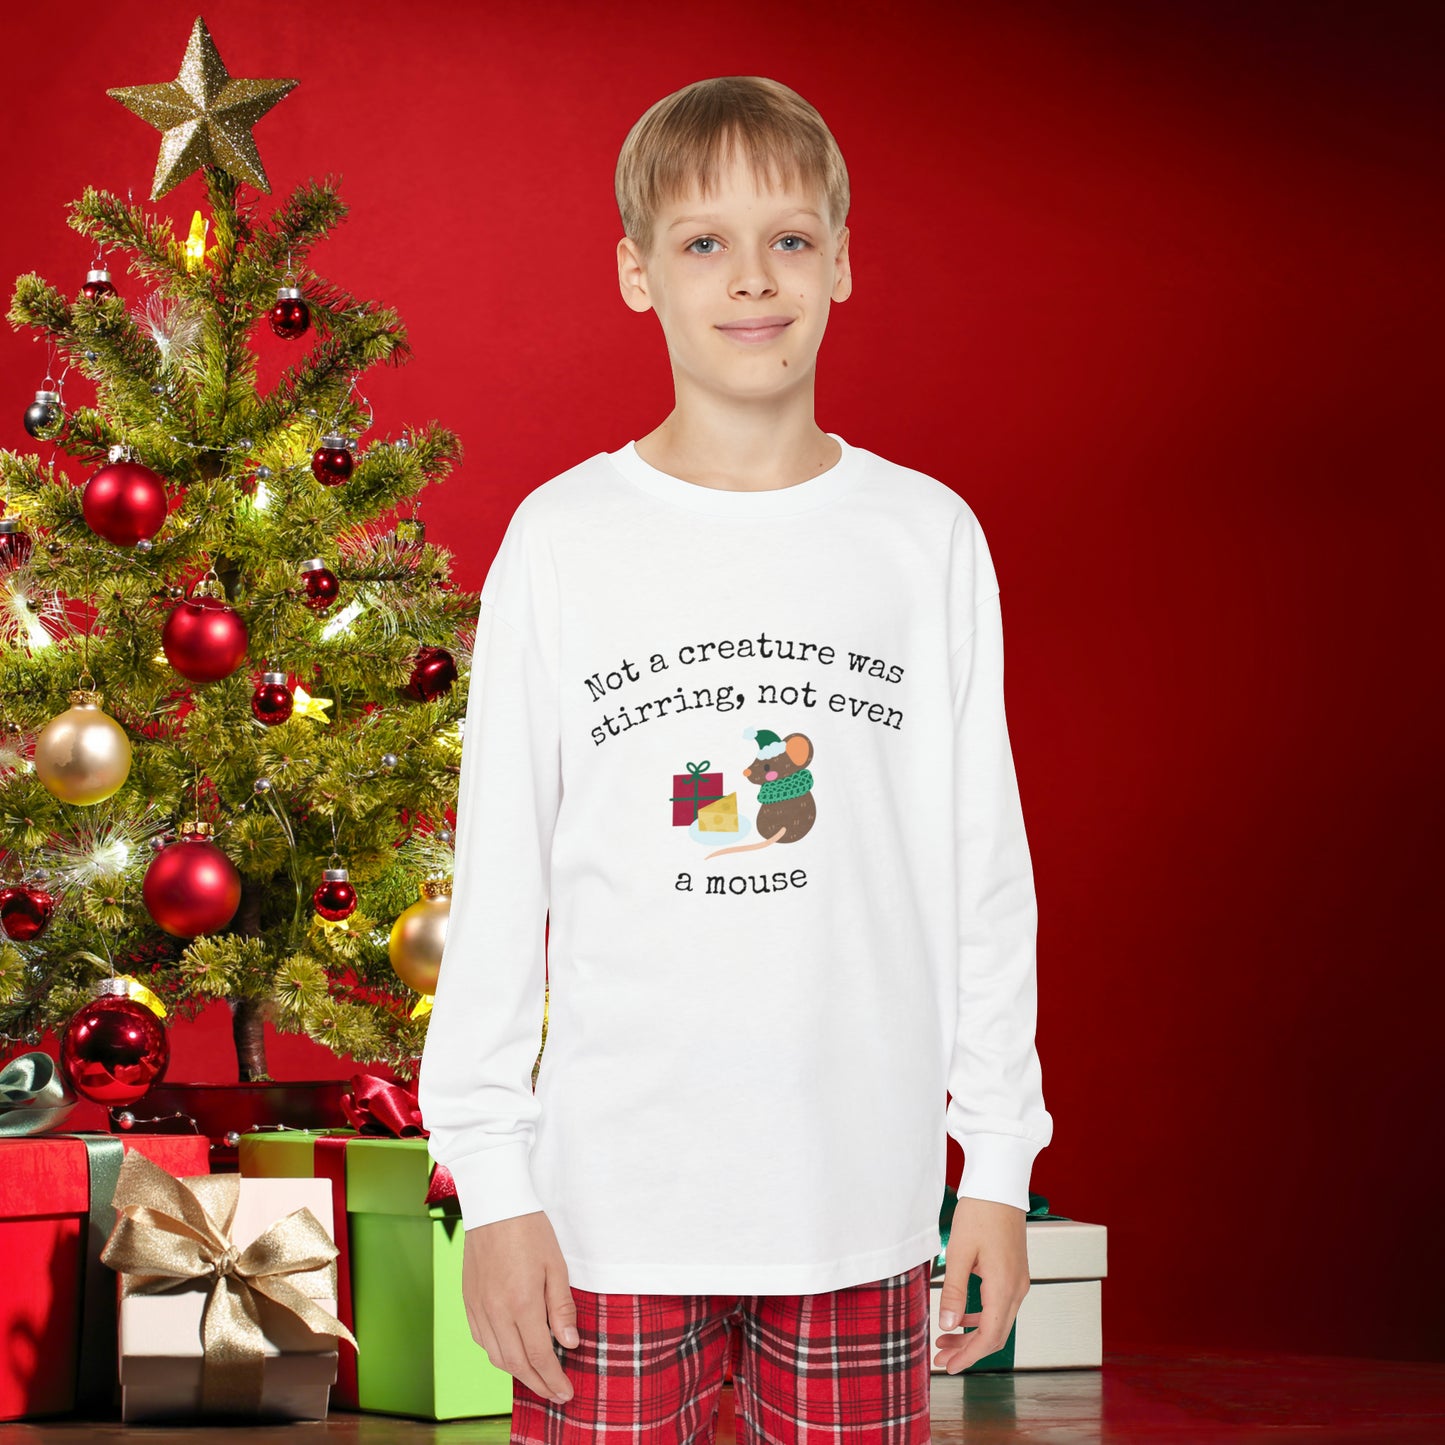 Youth Long Sleeve Holiday Outfit Set, Family Christmas Pajama Set, "Not a creature was stirring, not even a mouse" Shirt and Flannel Pant Set